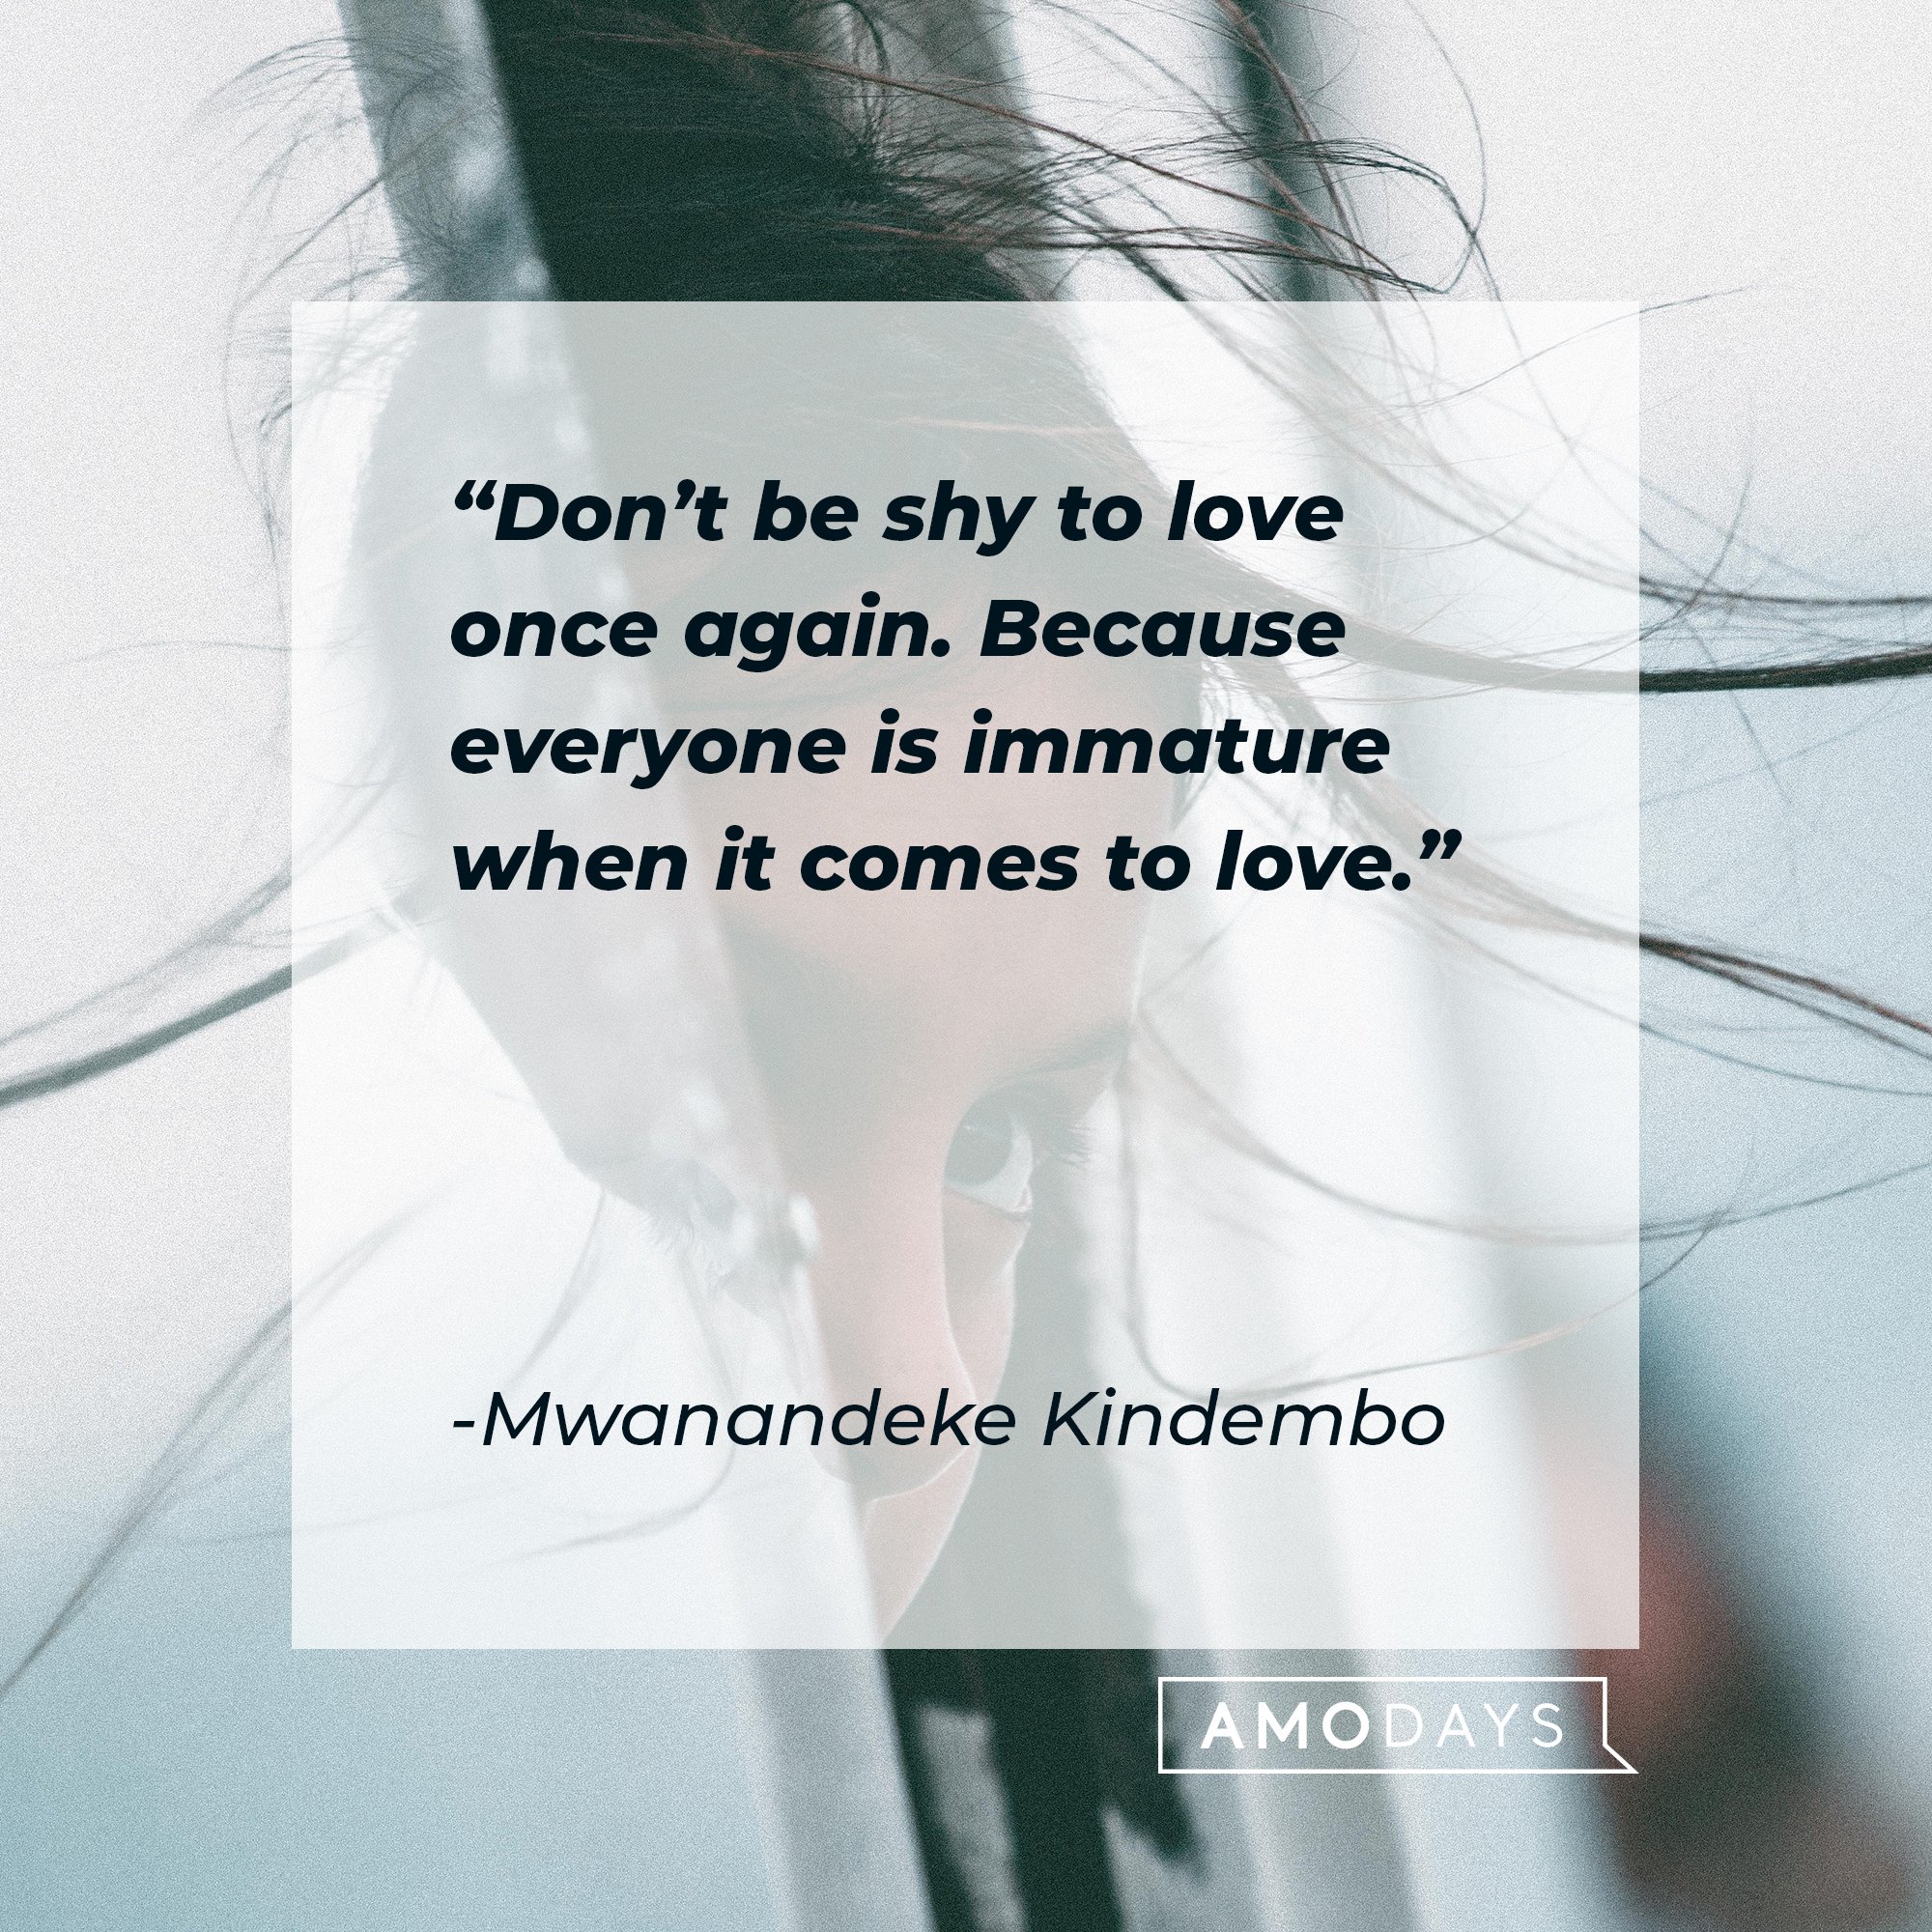 Mwanandeke Kindembo's quote: “Don’t be shy to love once again. Because everyone is immature when it comes to love.” | Image: AmoDays